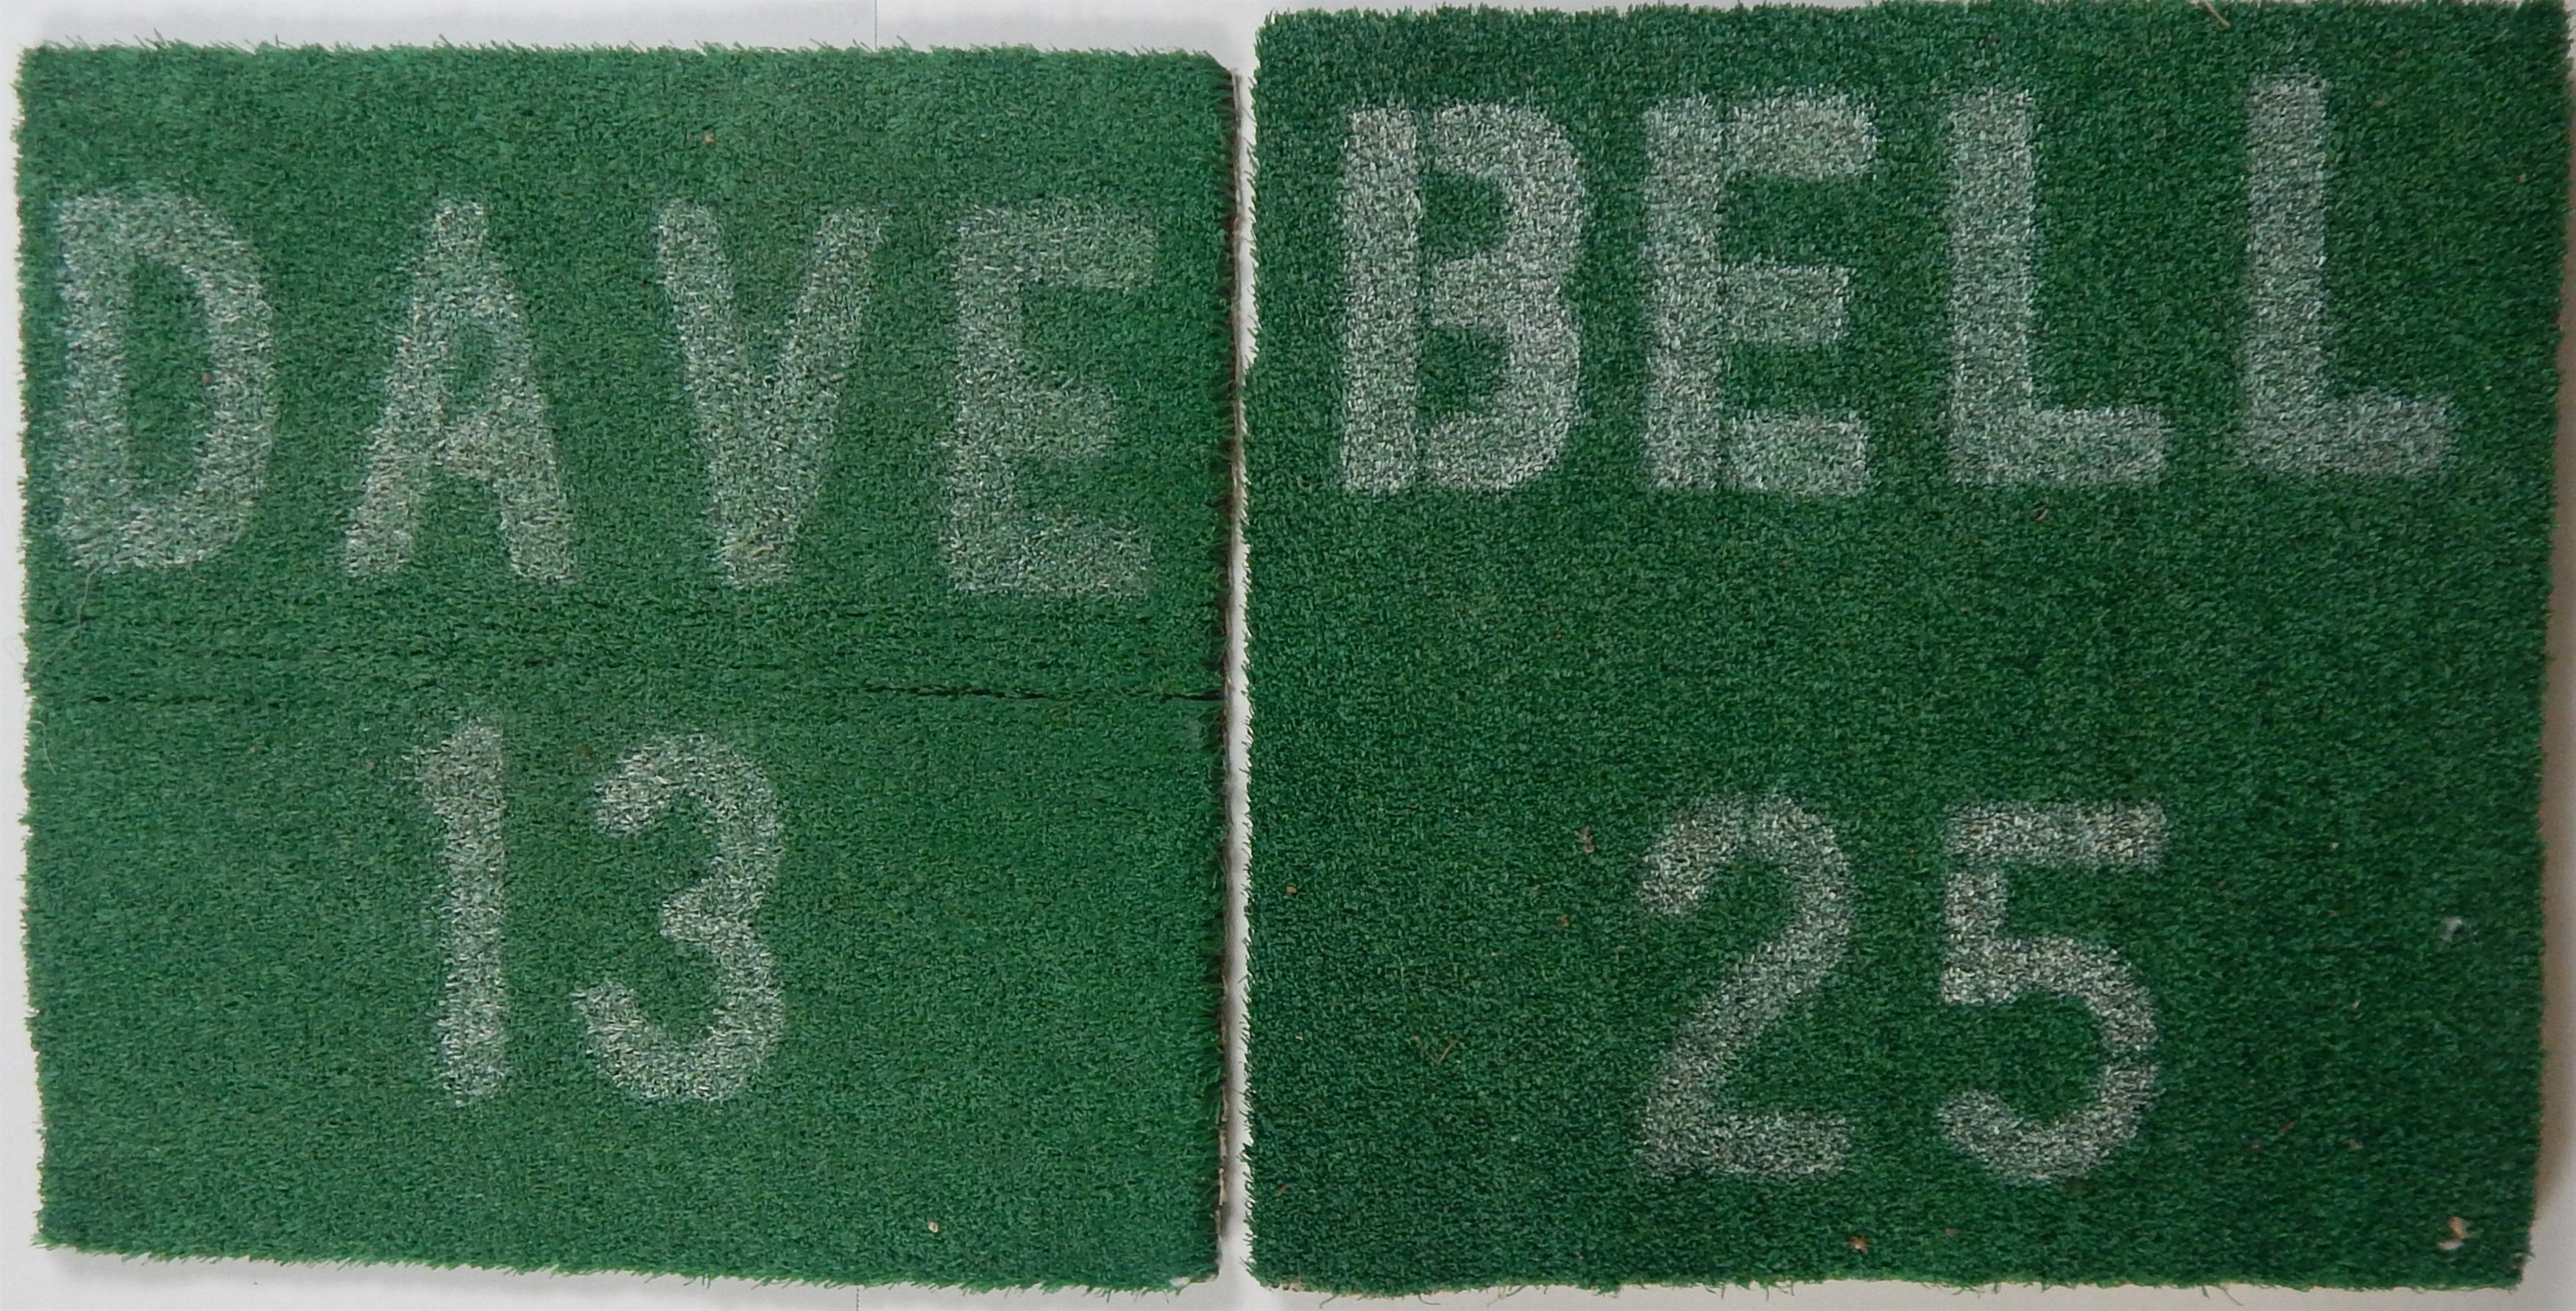 Baseball Memorabilia - Riverfront Stadium Turf Used in Reds Locker Room From the Bernie Stowe Collection